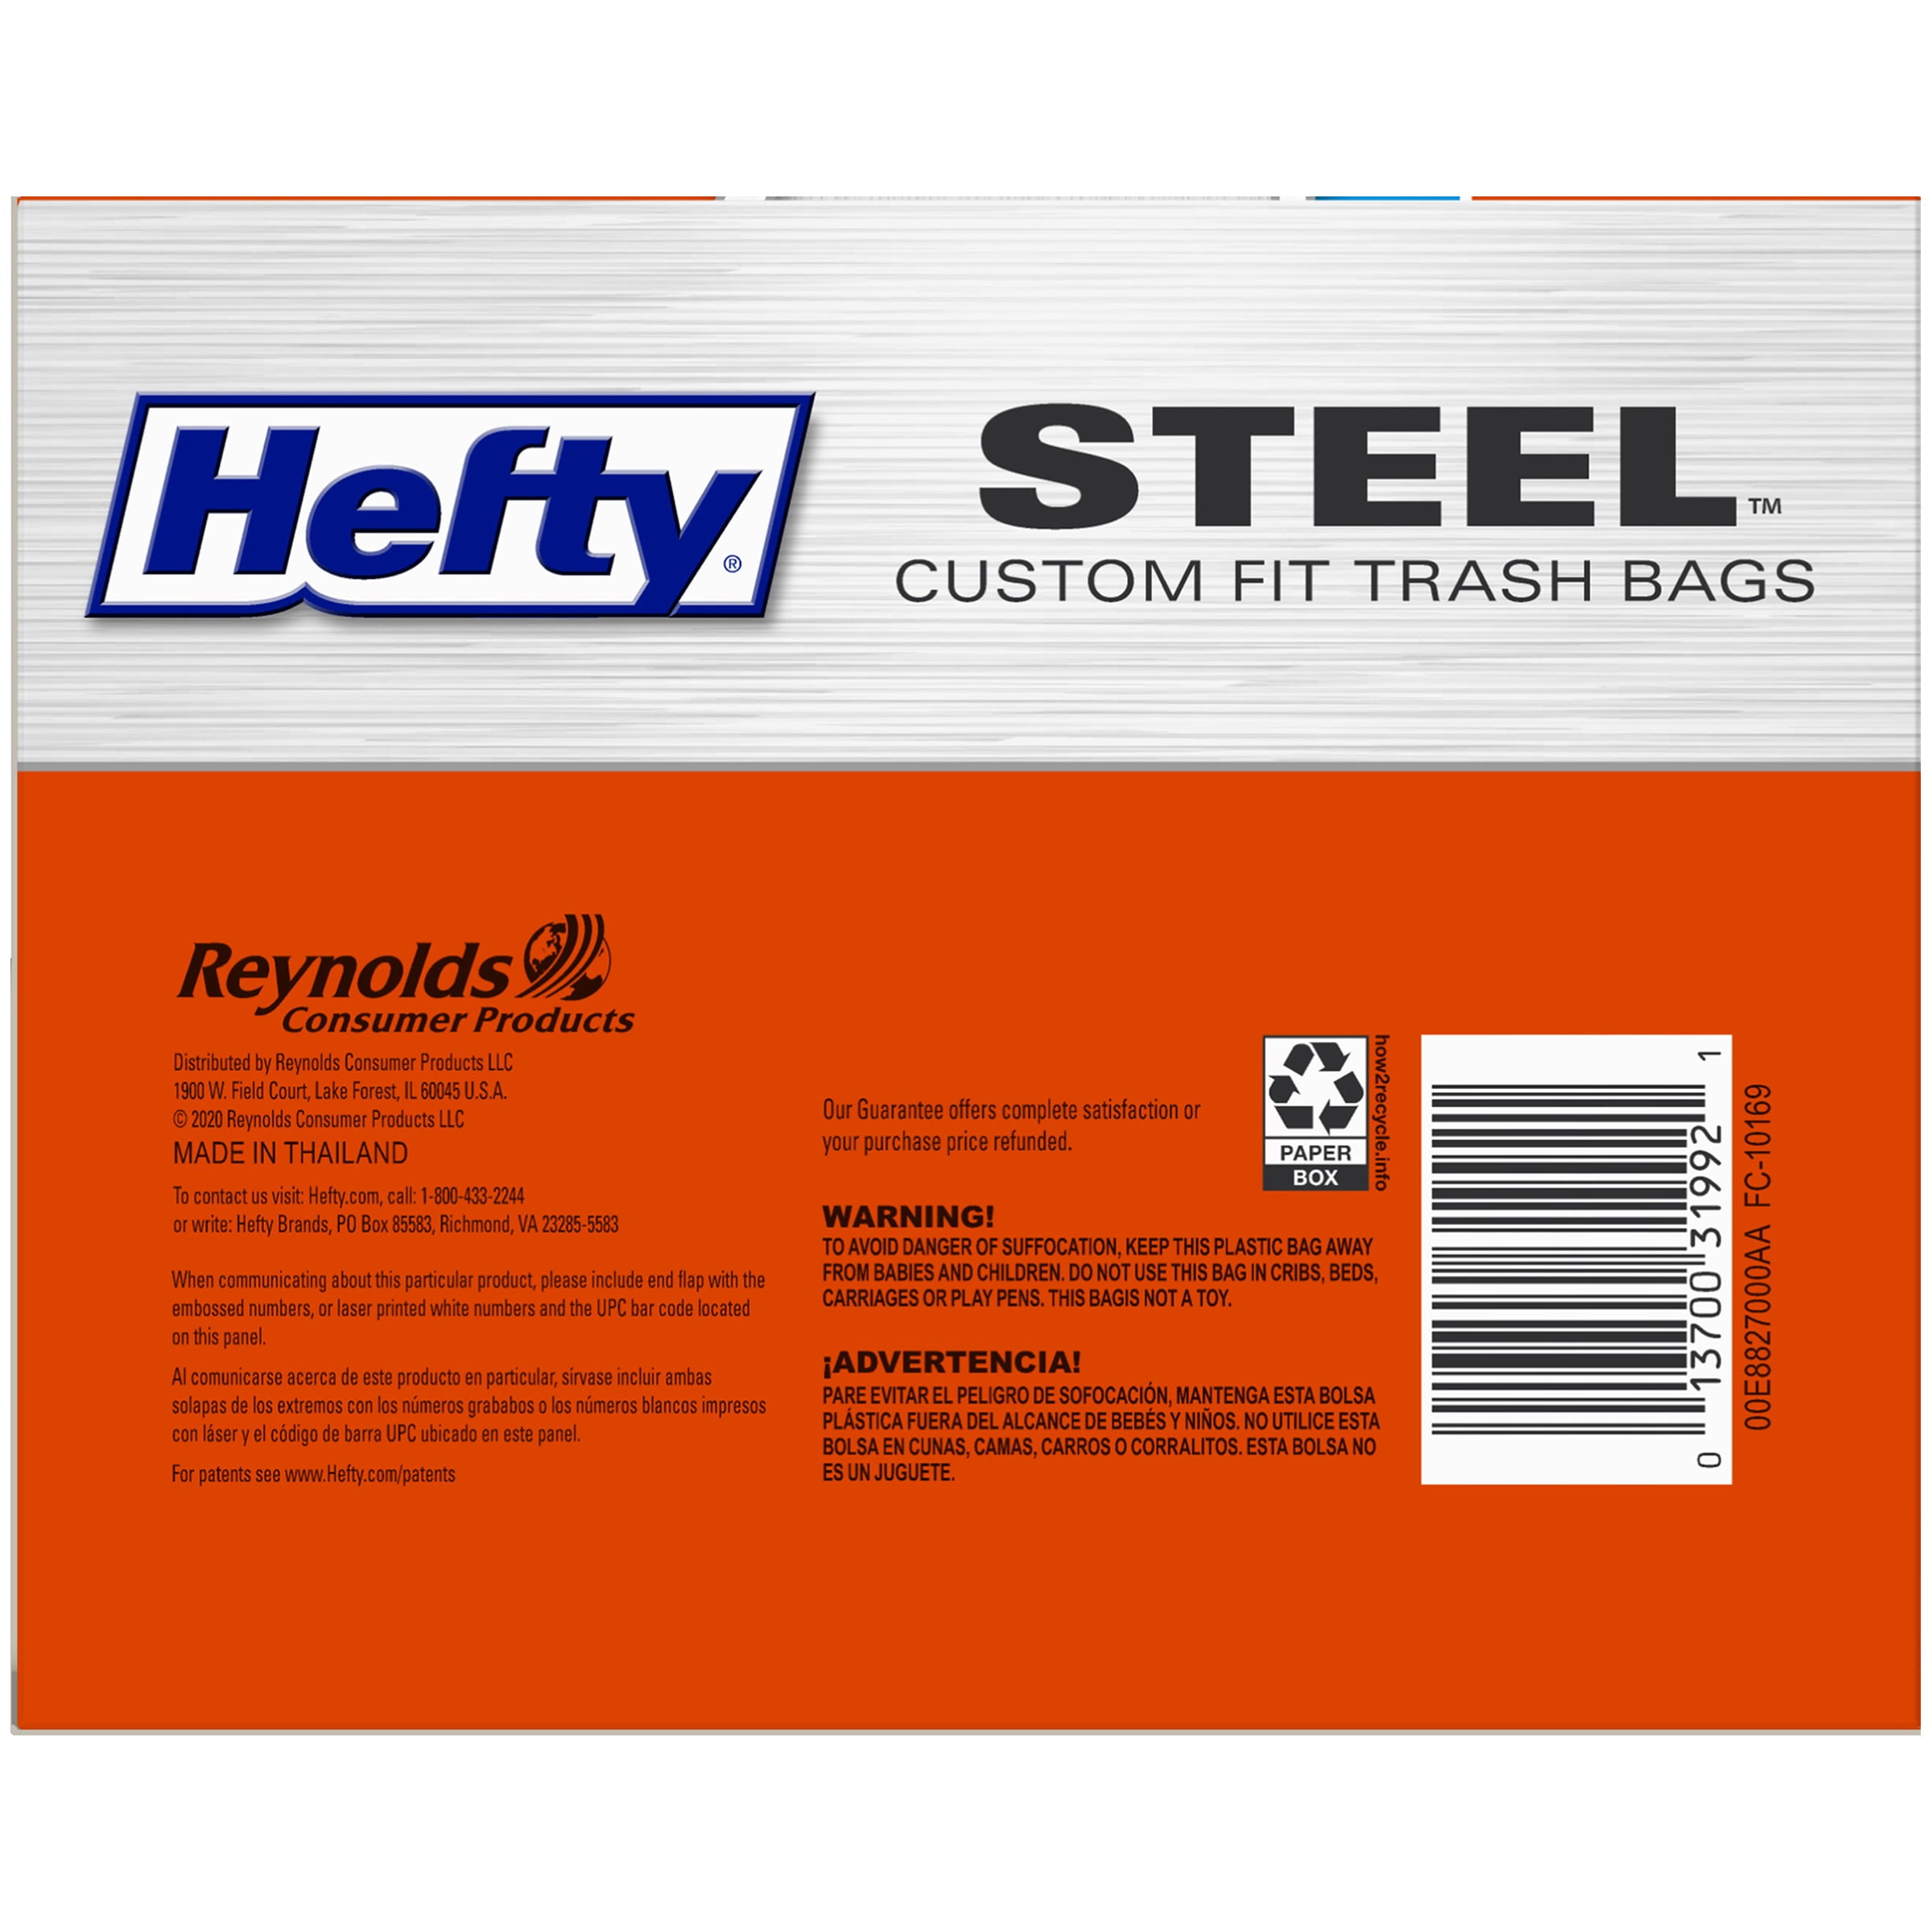 Hefty Made to Fit Trash Bags, Fits simplehuman Size H (9 Gallons), 100 Count